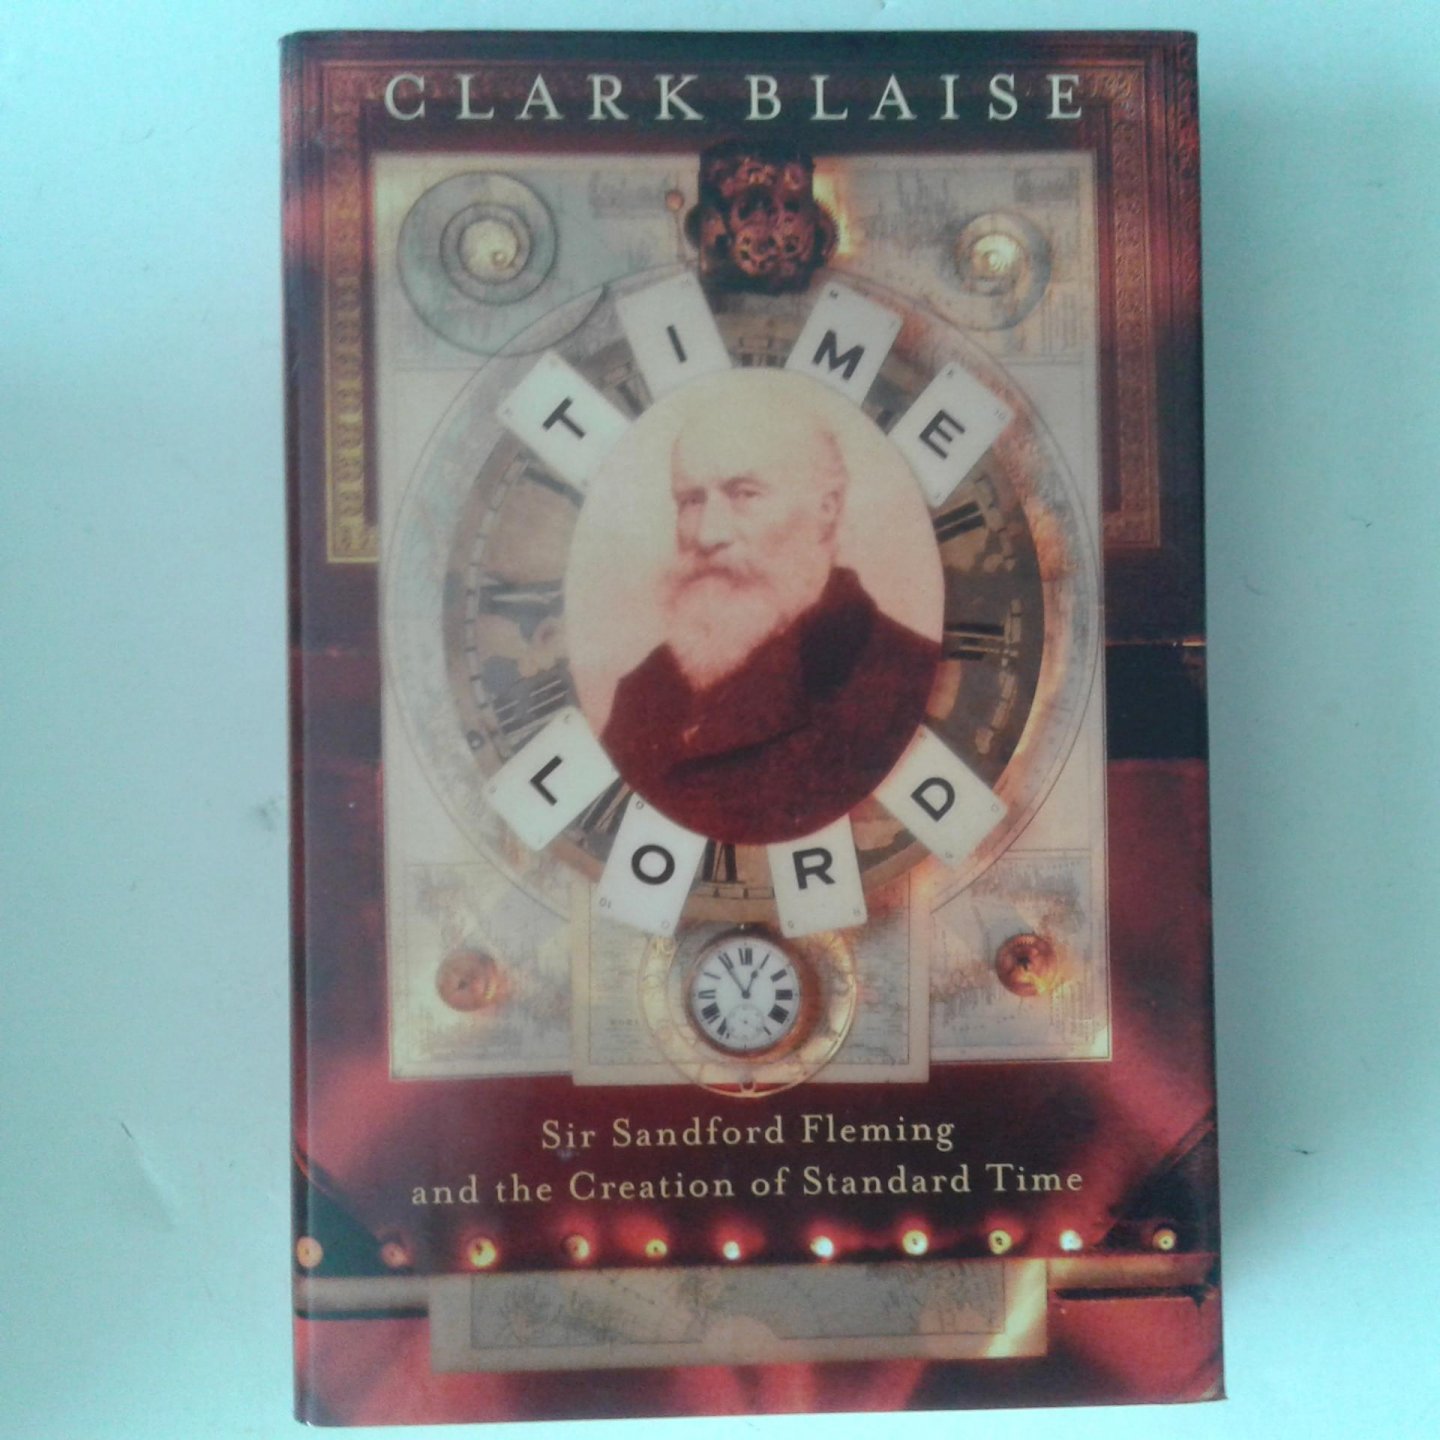 Blaise, Clark - Time Lord ; Sir Sandford Fleming and the Creation of Standard Time